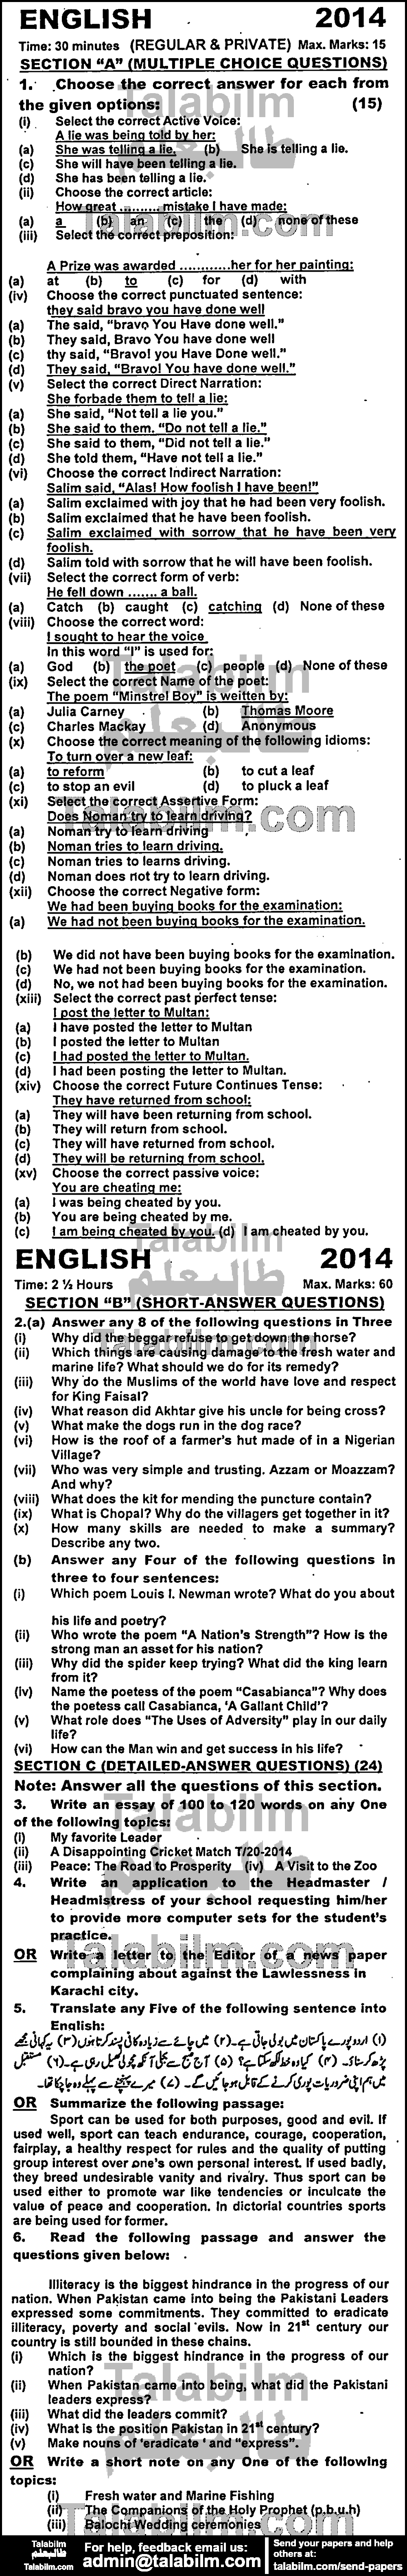 English 0 past paper for 2014 Group-I